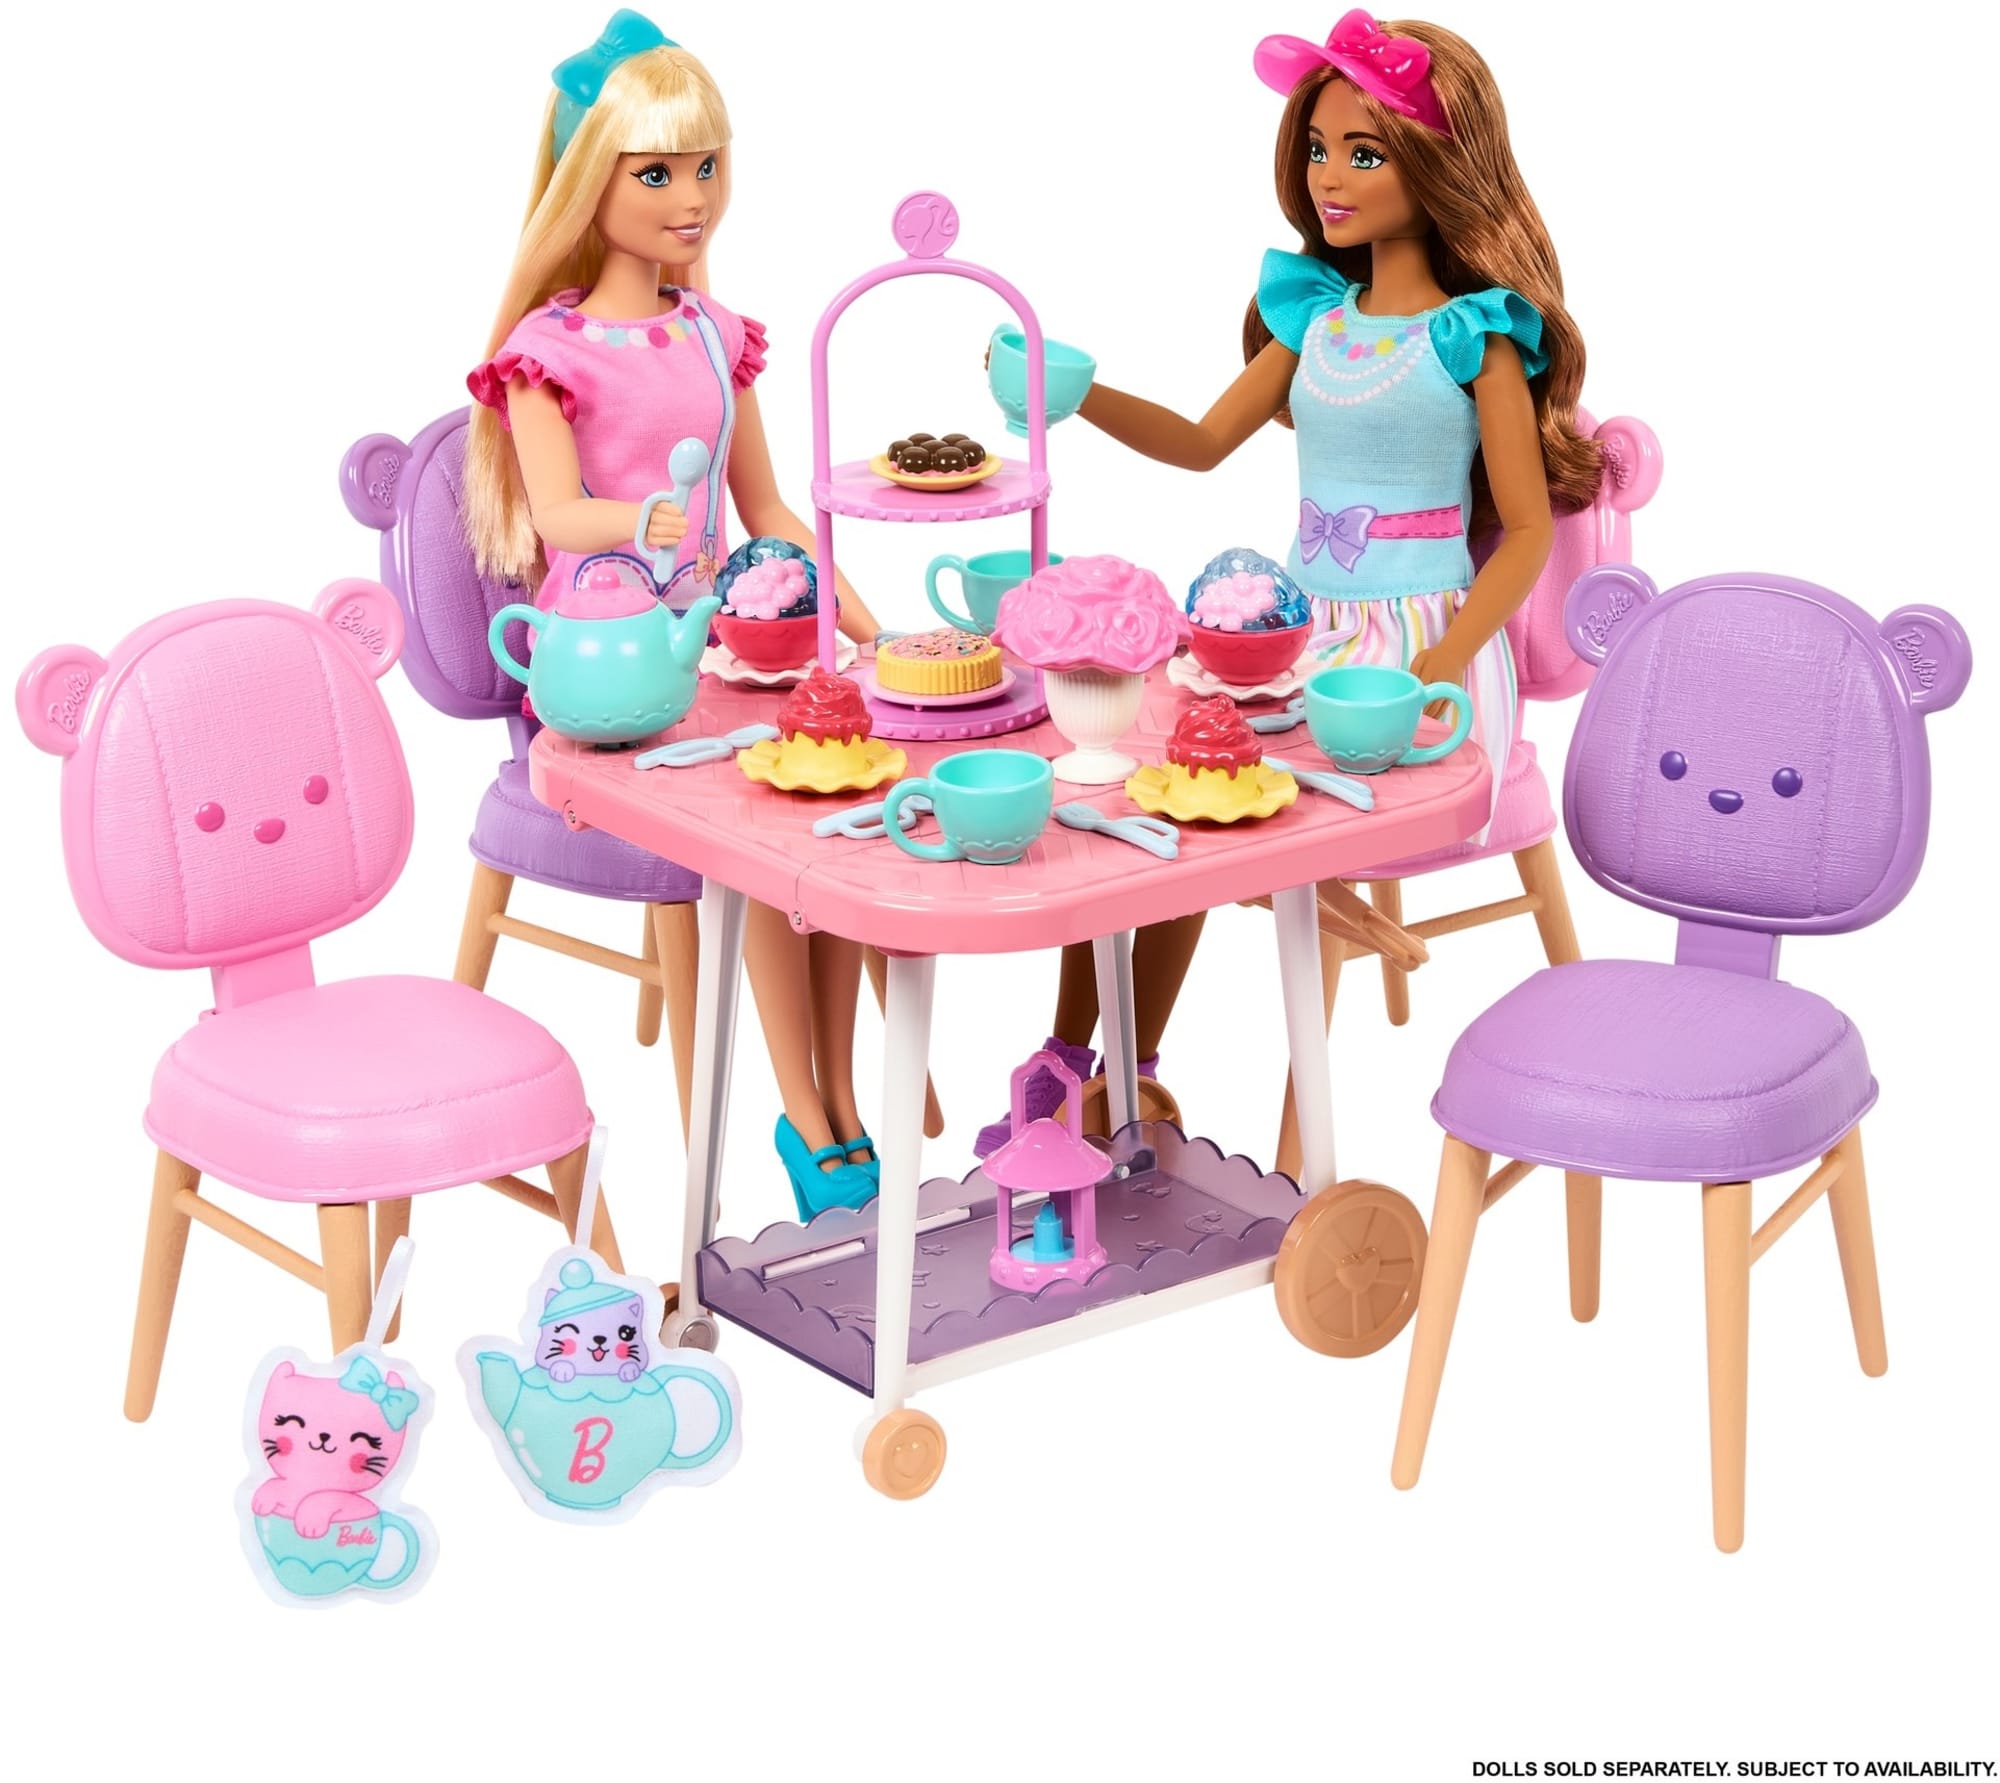 Barbie Sets for Preschoolers, Tea Party and Tent